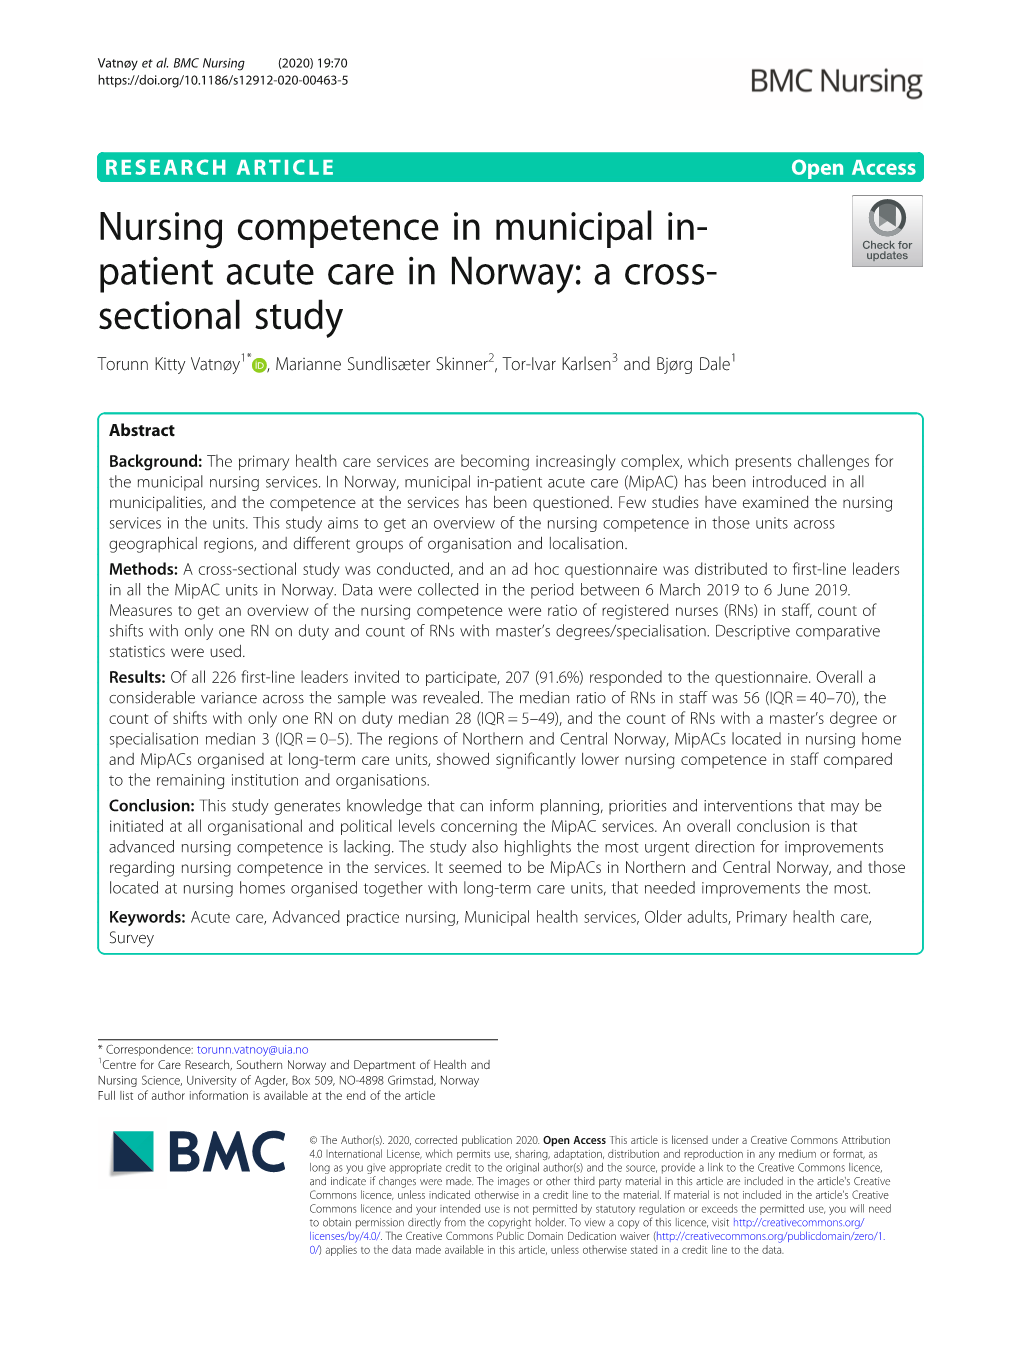 Nursing Competence in Municipal In-Patient Acute Care in Norway: a Cross-Sectional Study